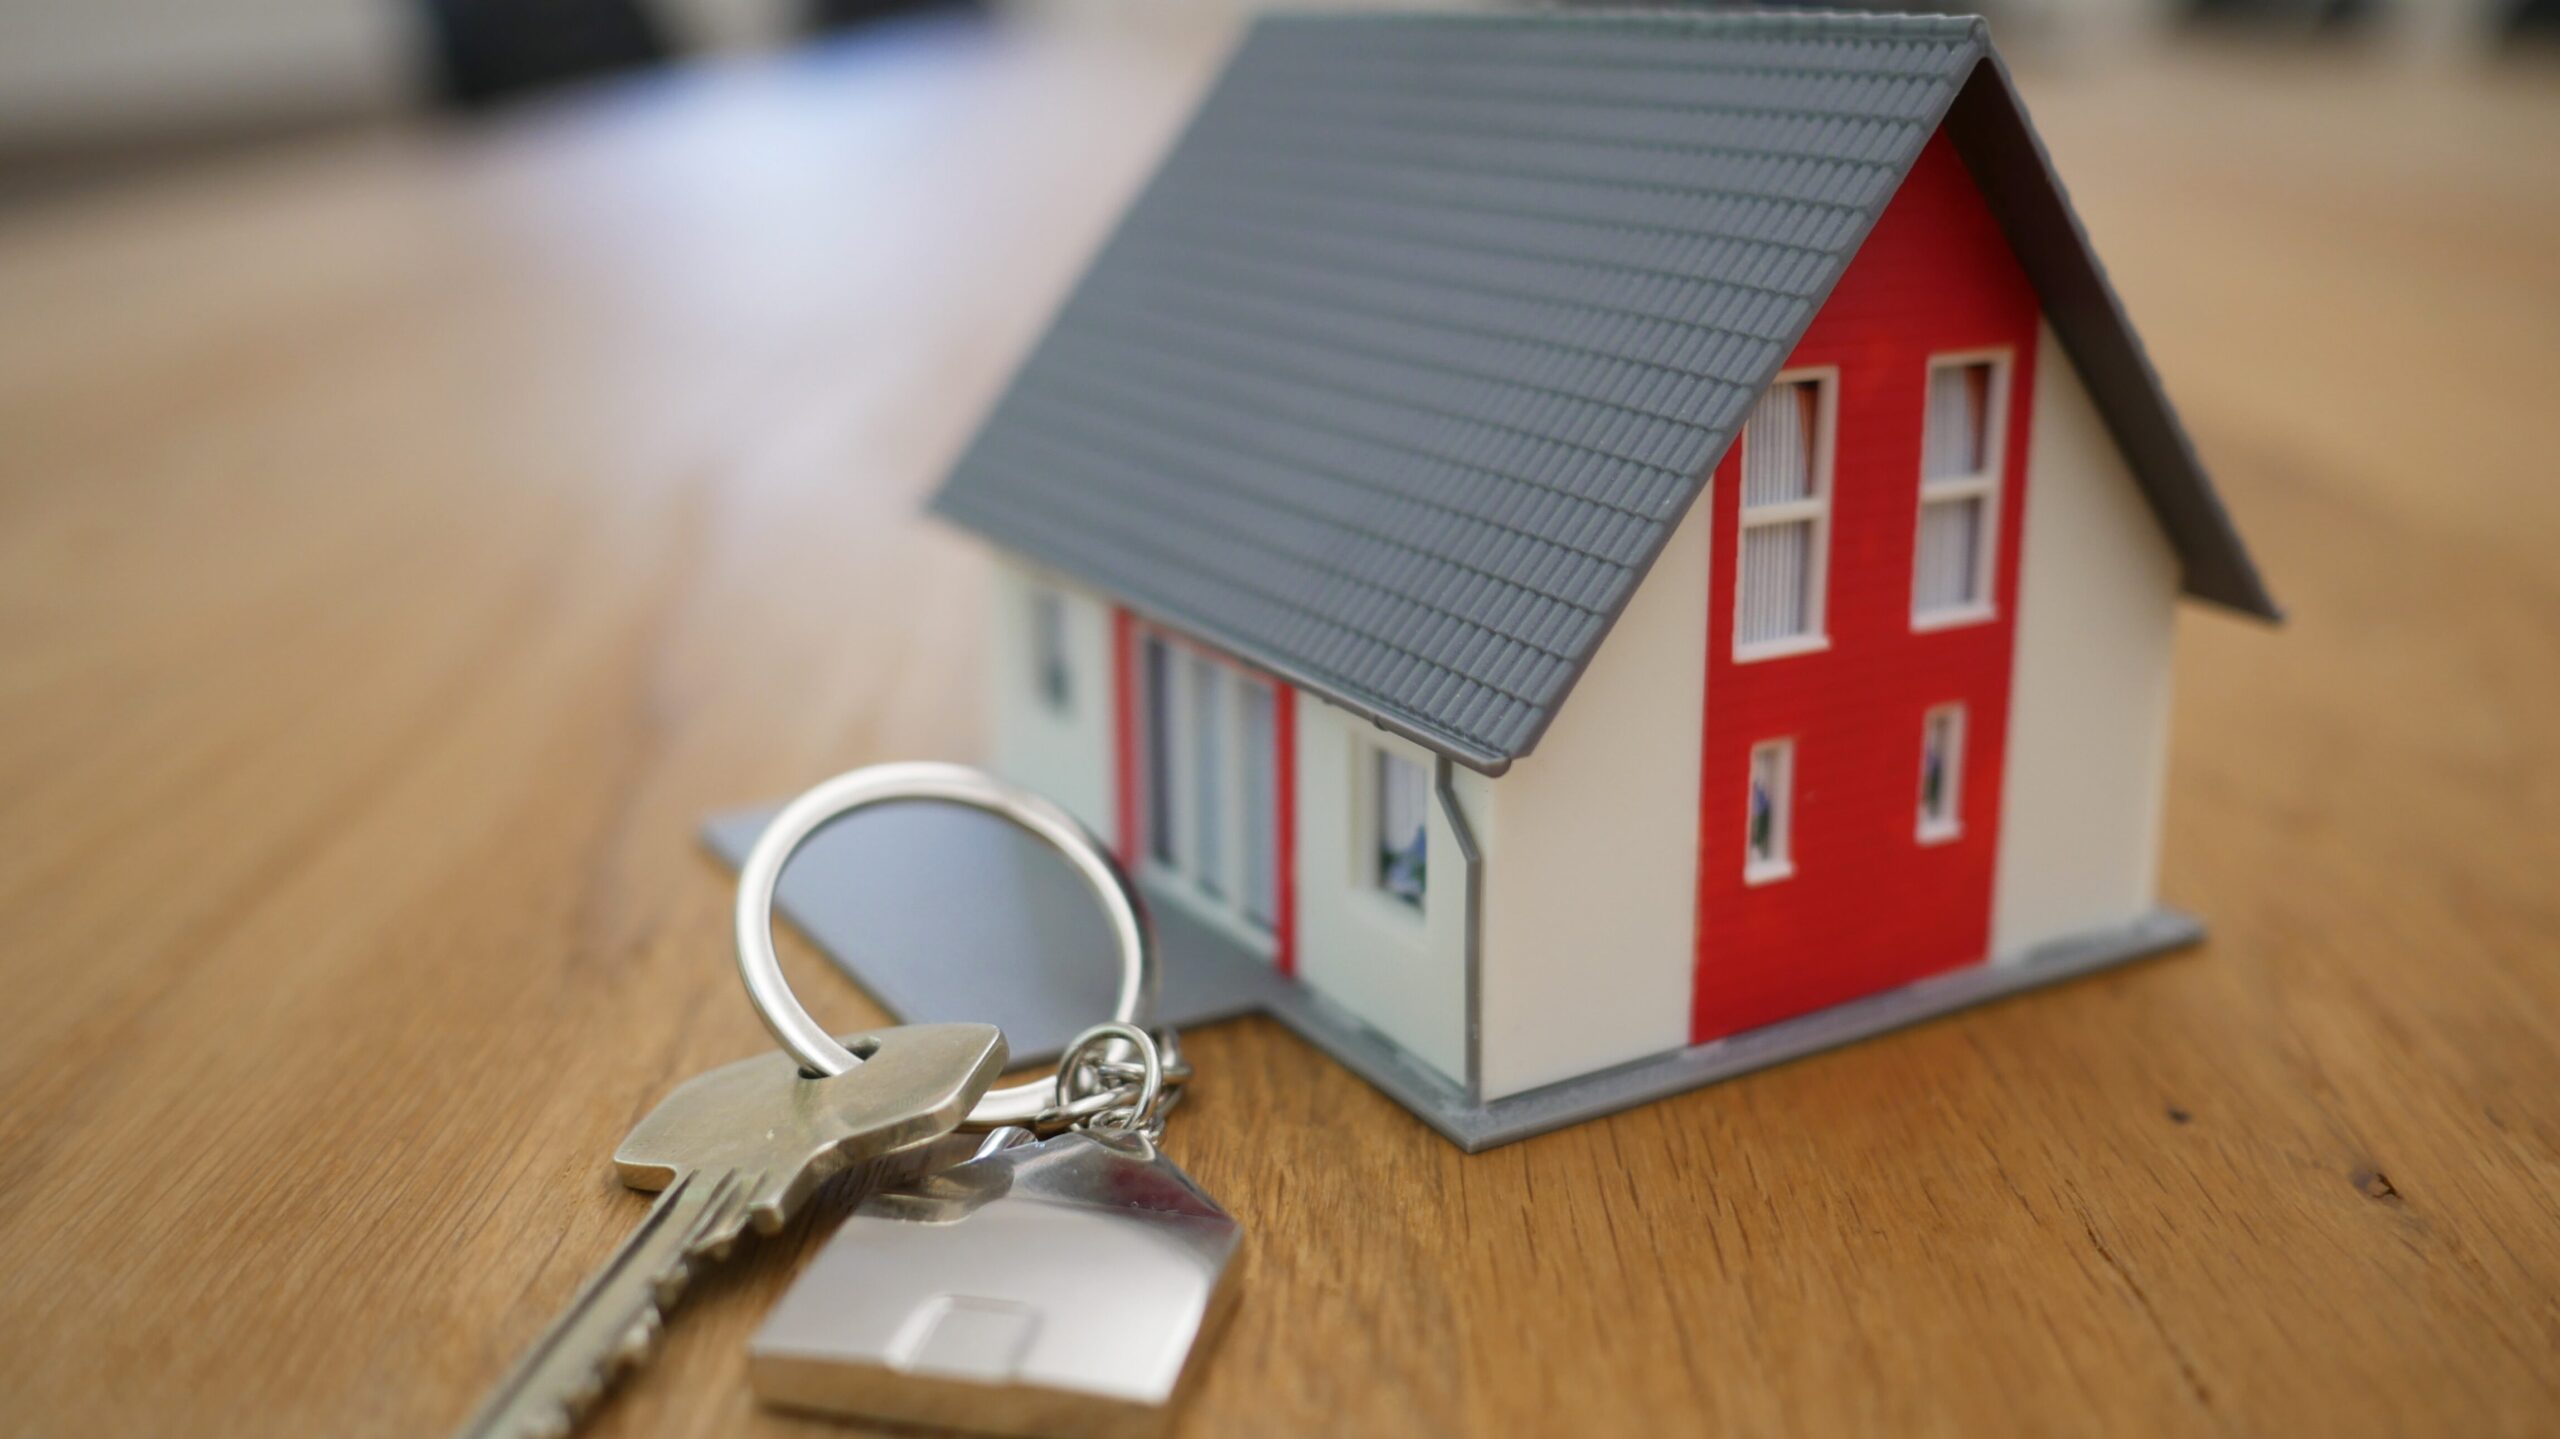 buyers agent commission- little red house model on table next to a metal key on a key chain